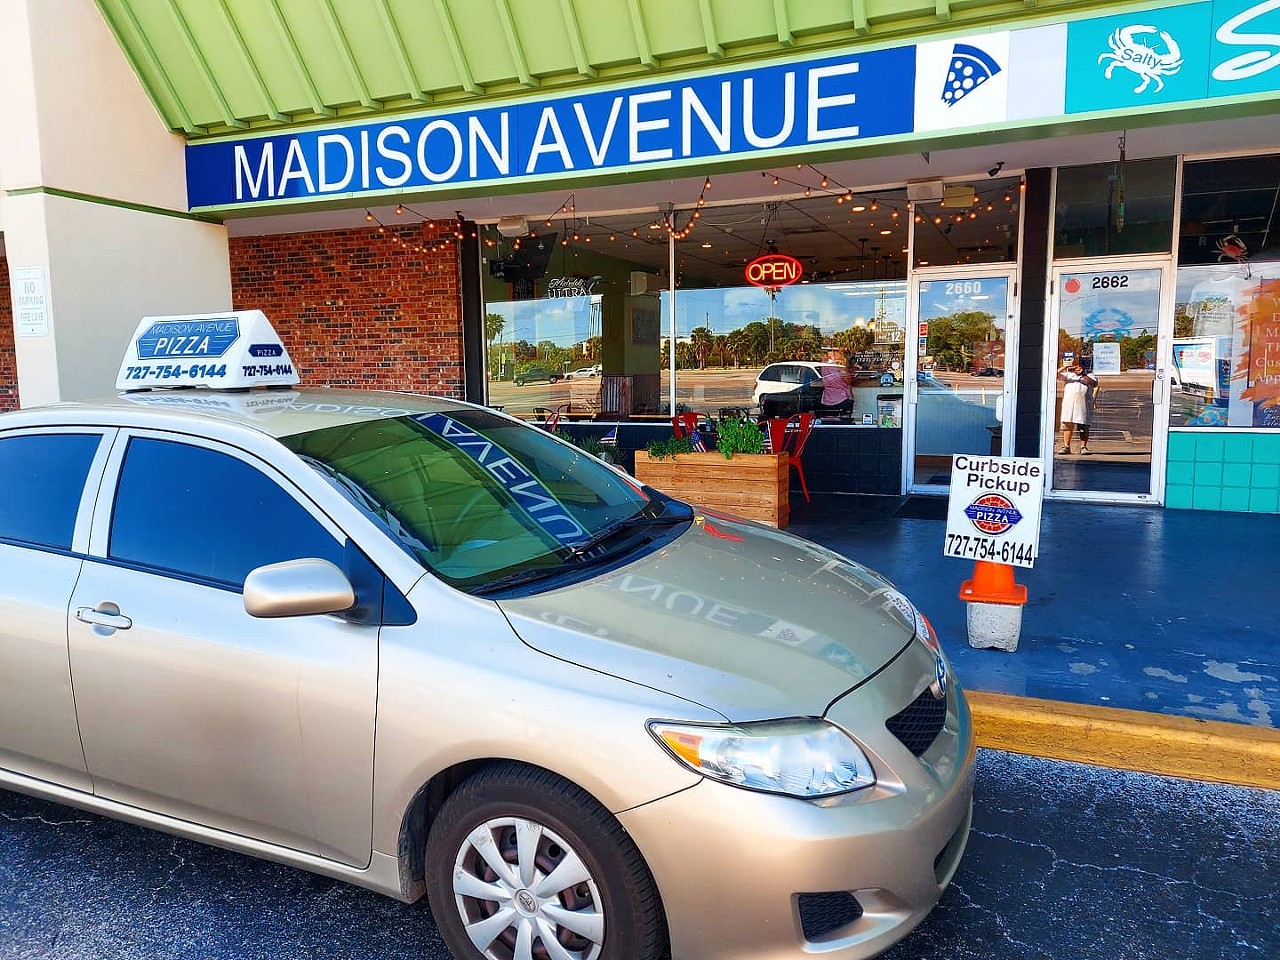 Madison Avenue Pizza
2660 Bayshore Blvd., Dunedin. 727-754-6144
Madison Avenue Pizza, which is participating in Tampa Bay Pizza Week, is still offering curbside pickup and contactless delivery. The restaurant is also offering a $10 deal for a 12-inch Cuban pizza.
Photo via  Madison Avenue Pizza&#146;s Facebook